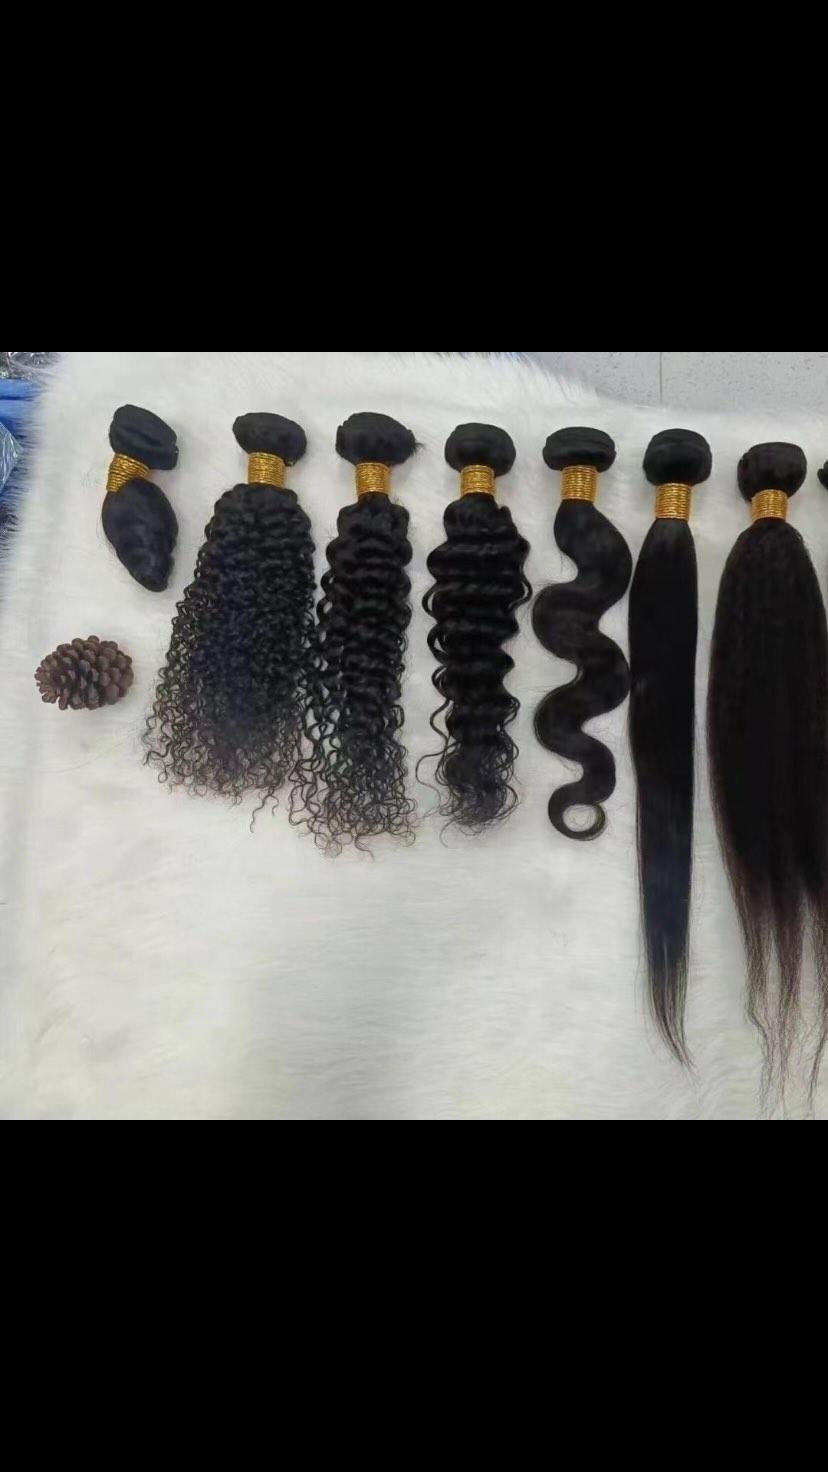 class="content__text"
 #ouaga #hairstyle #wigs #quality 
 